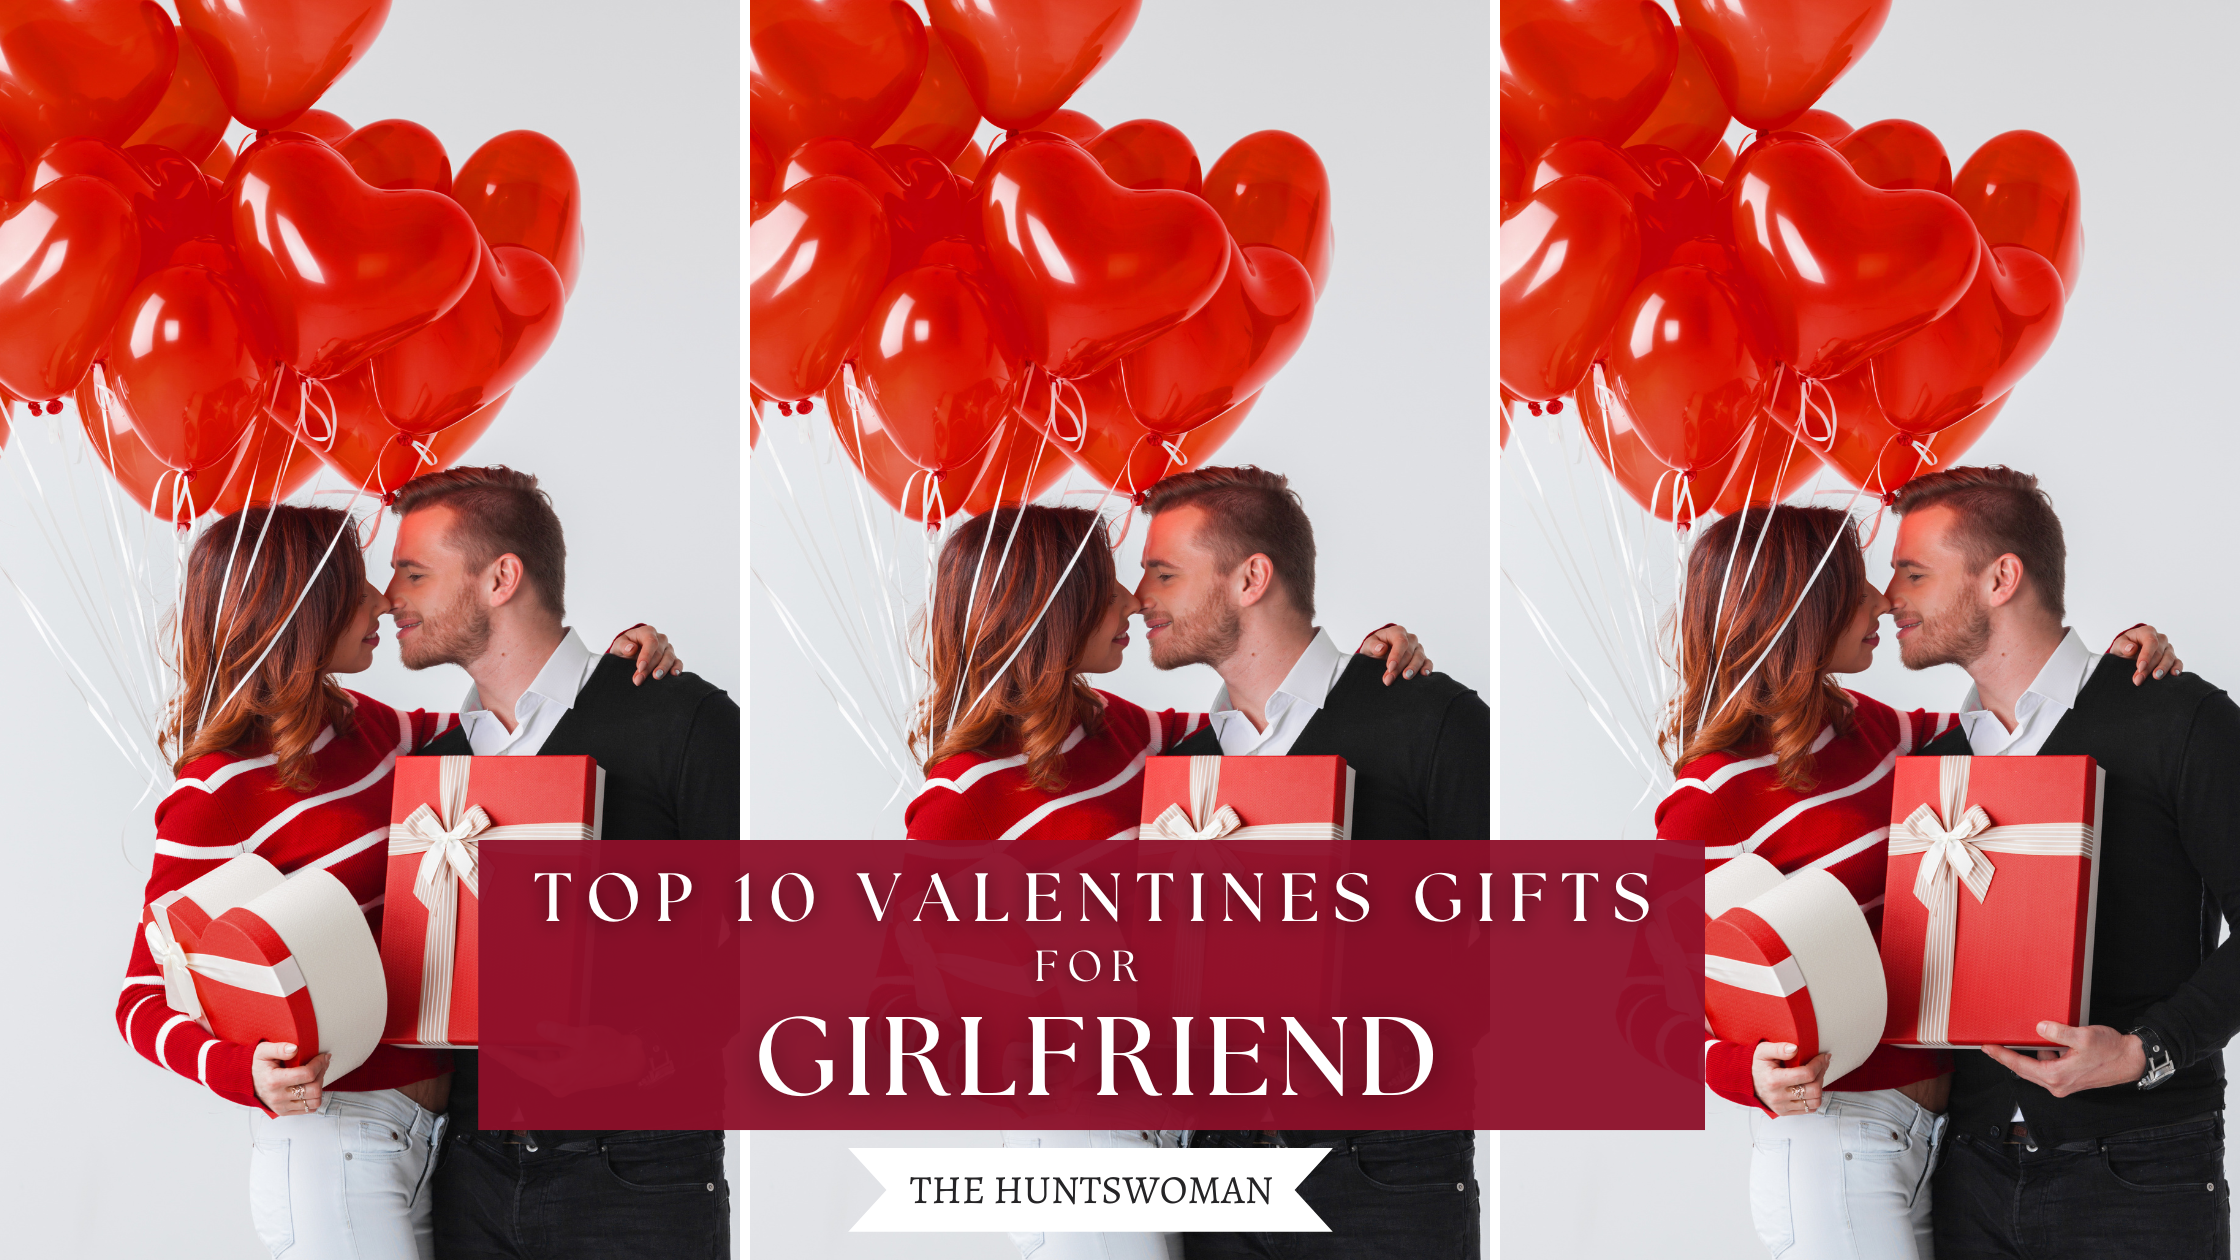 10 Things To Get Your Girlfriend For Valentine's Day - The European  Business Review